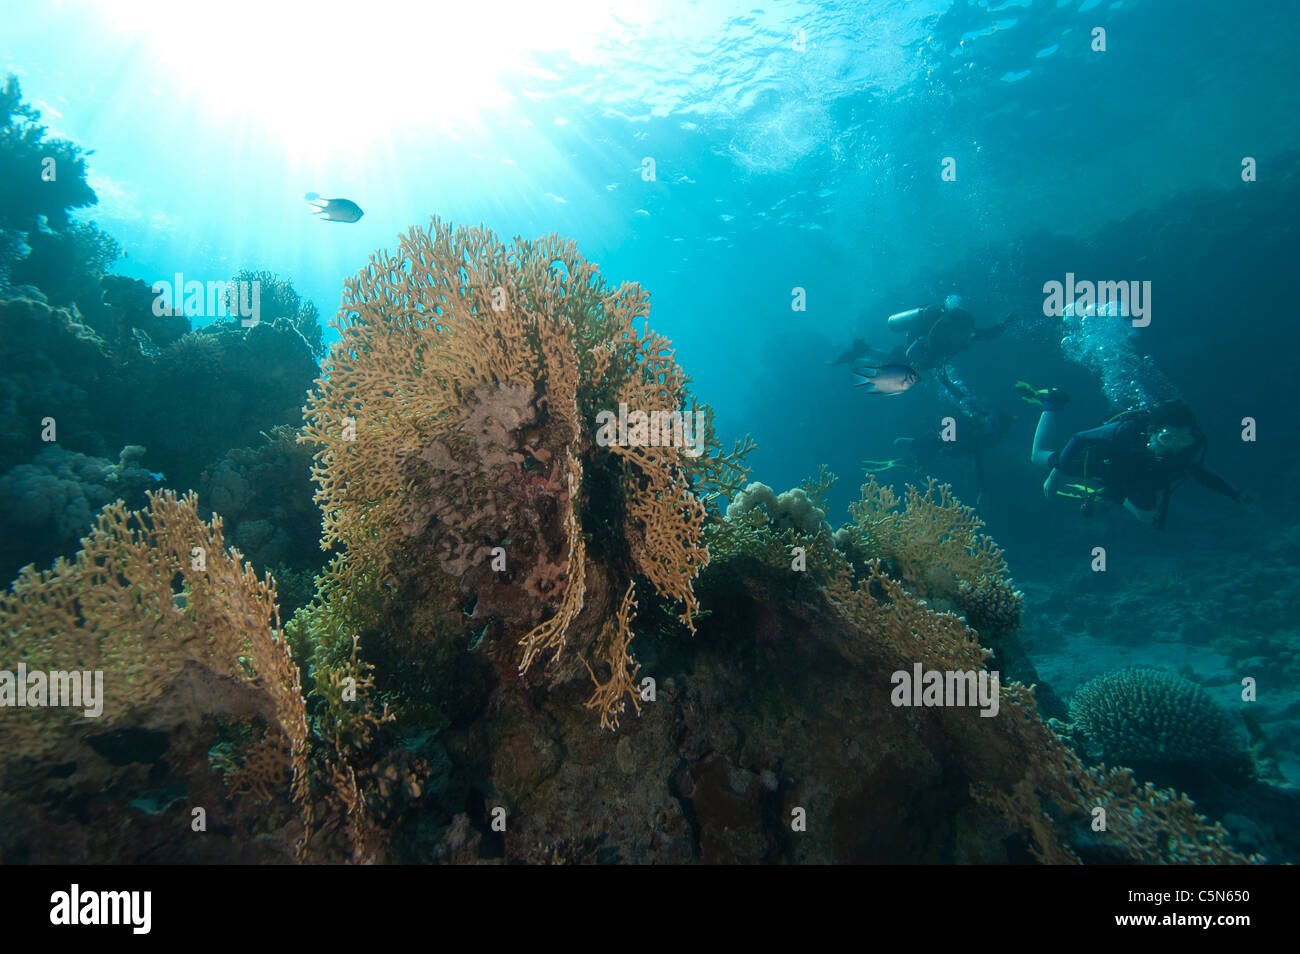 Beautiful underwater coral reef scene in the sun with scuba divers Stock Photo